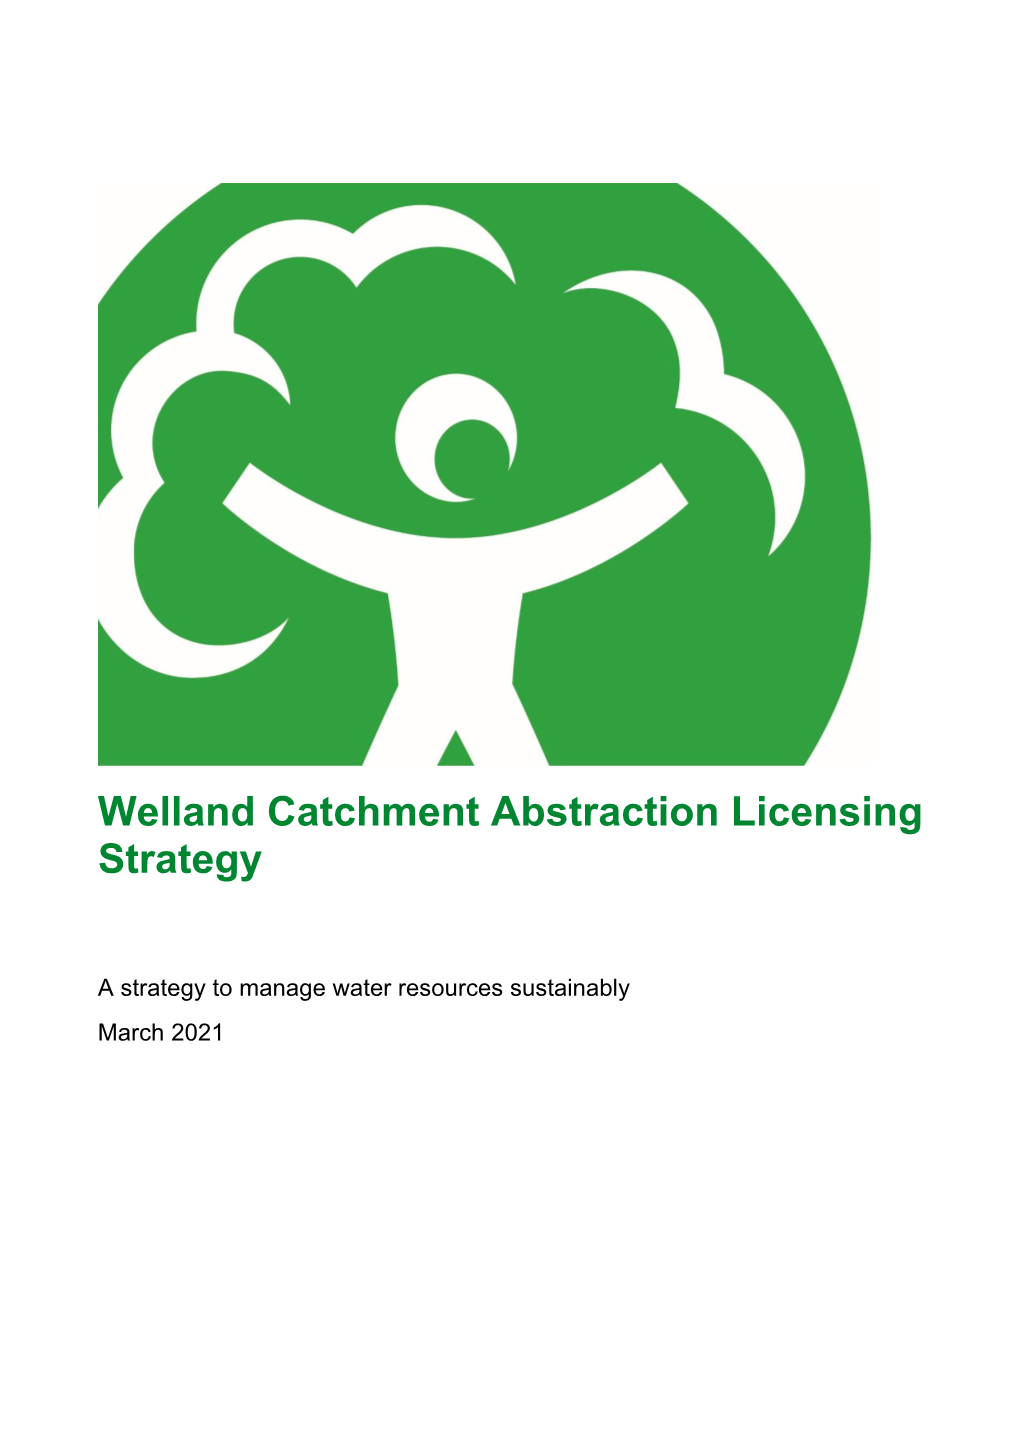 Welland Catchment Abstraction Licensing Strategy